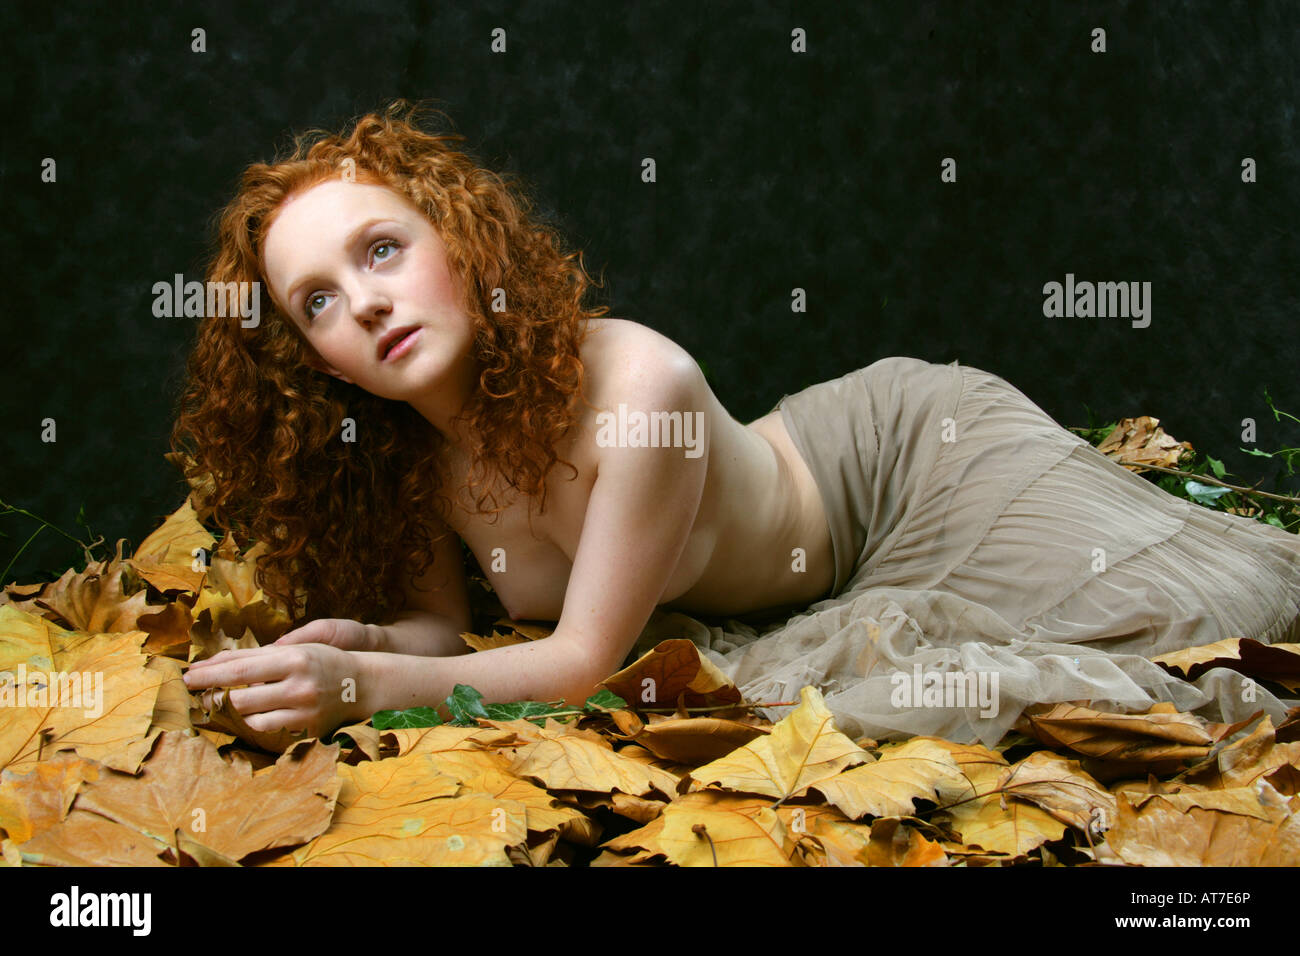 Art Nude Image - Semi Nude Red Haired Girl Laying on Leaves Stock Photo